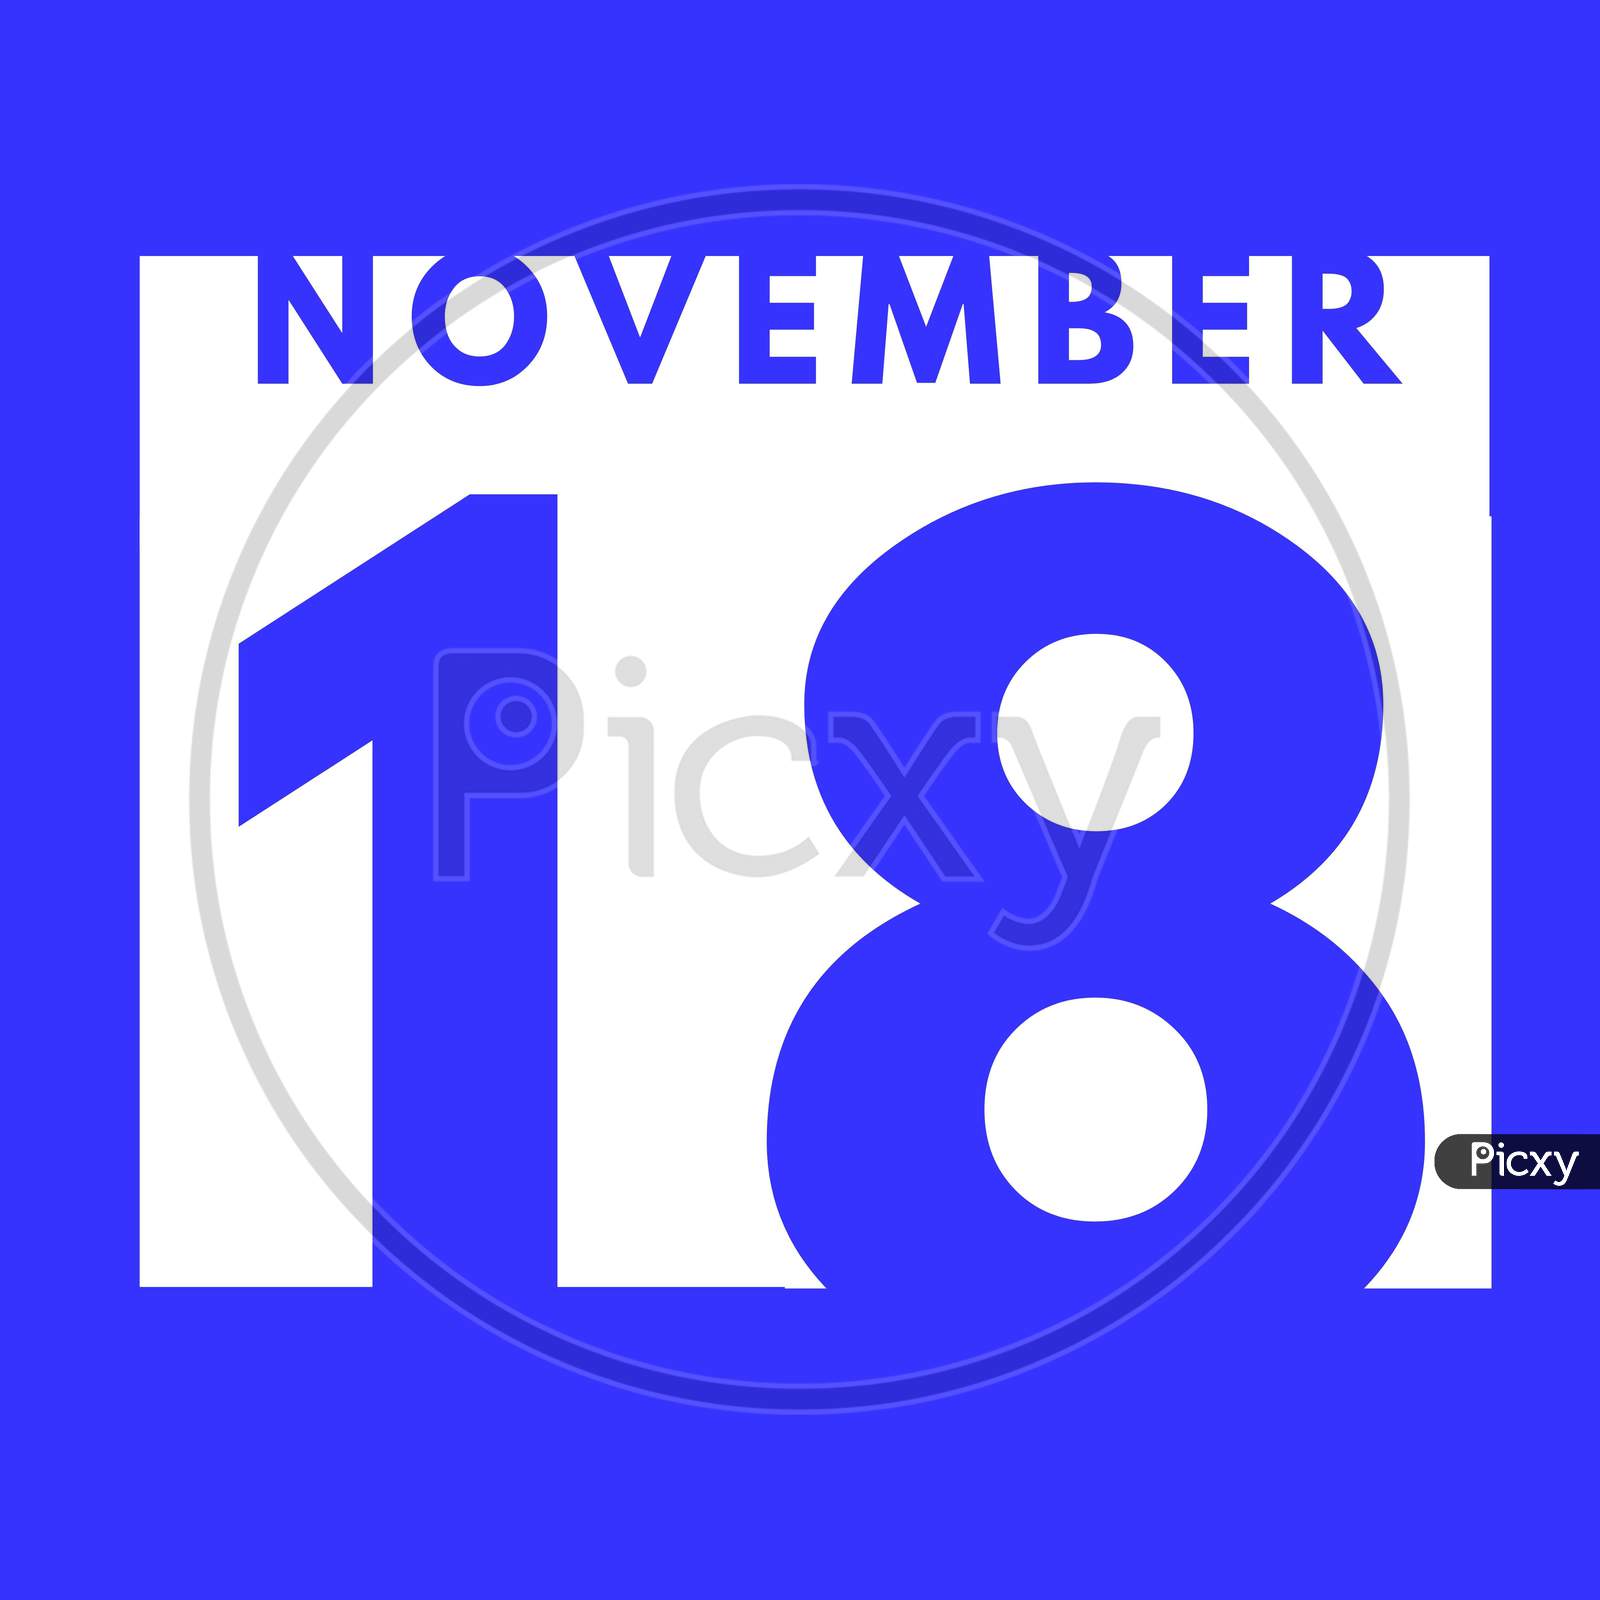 November 18 . Flat Modern Daily Calendar Icon .Date ,Day, Month .Calendar For The Month Of November